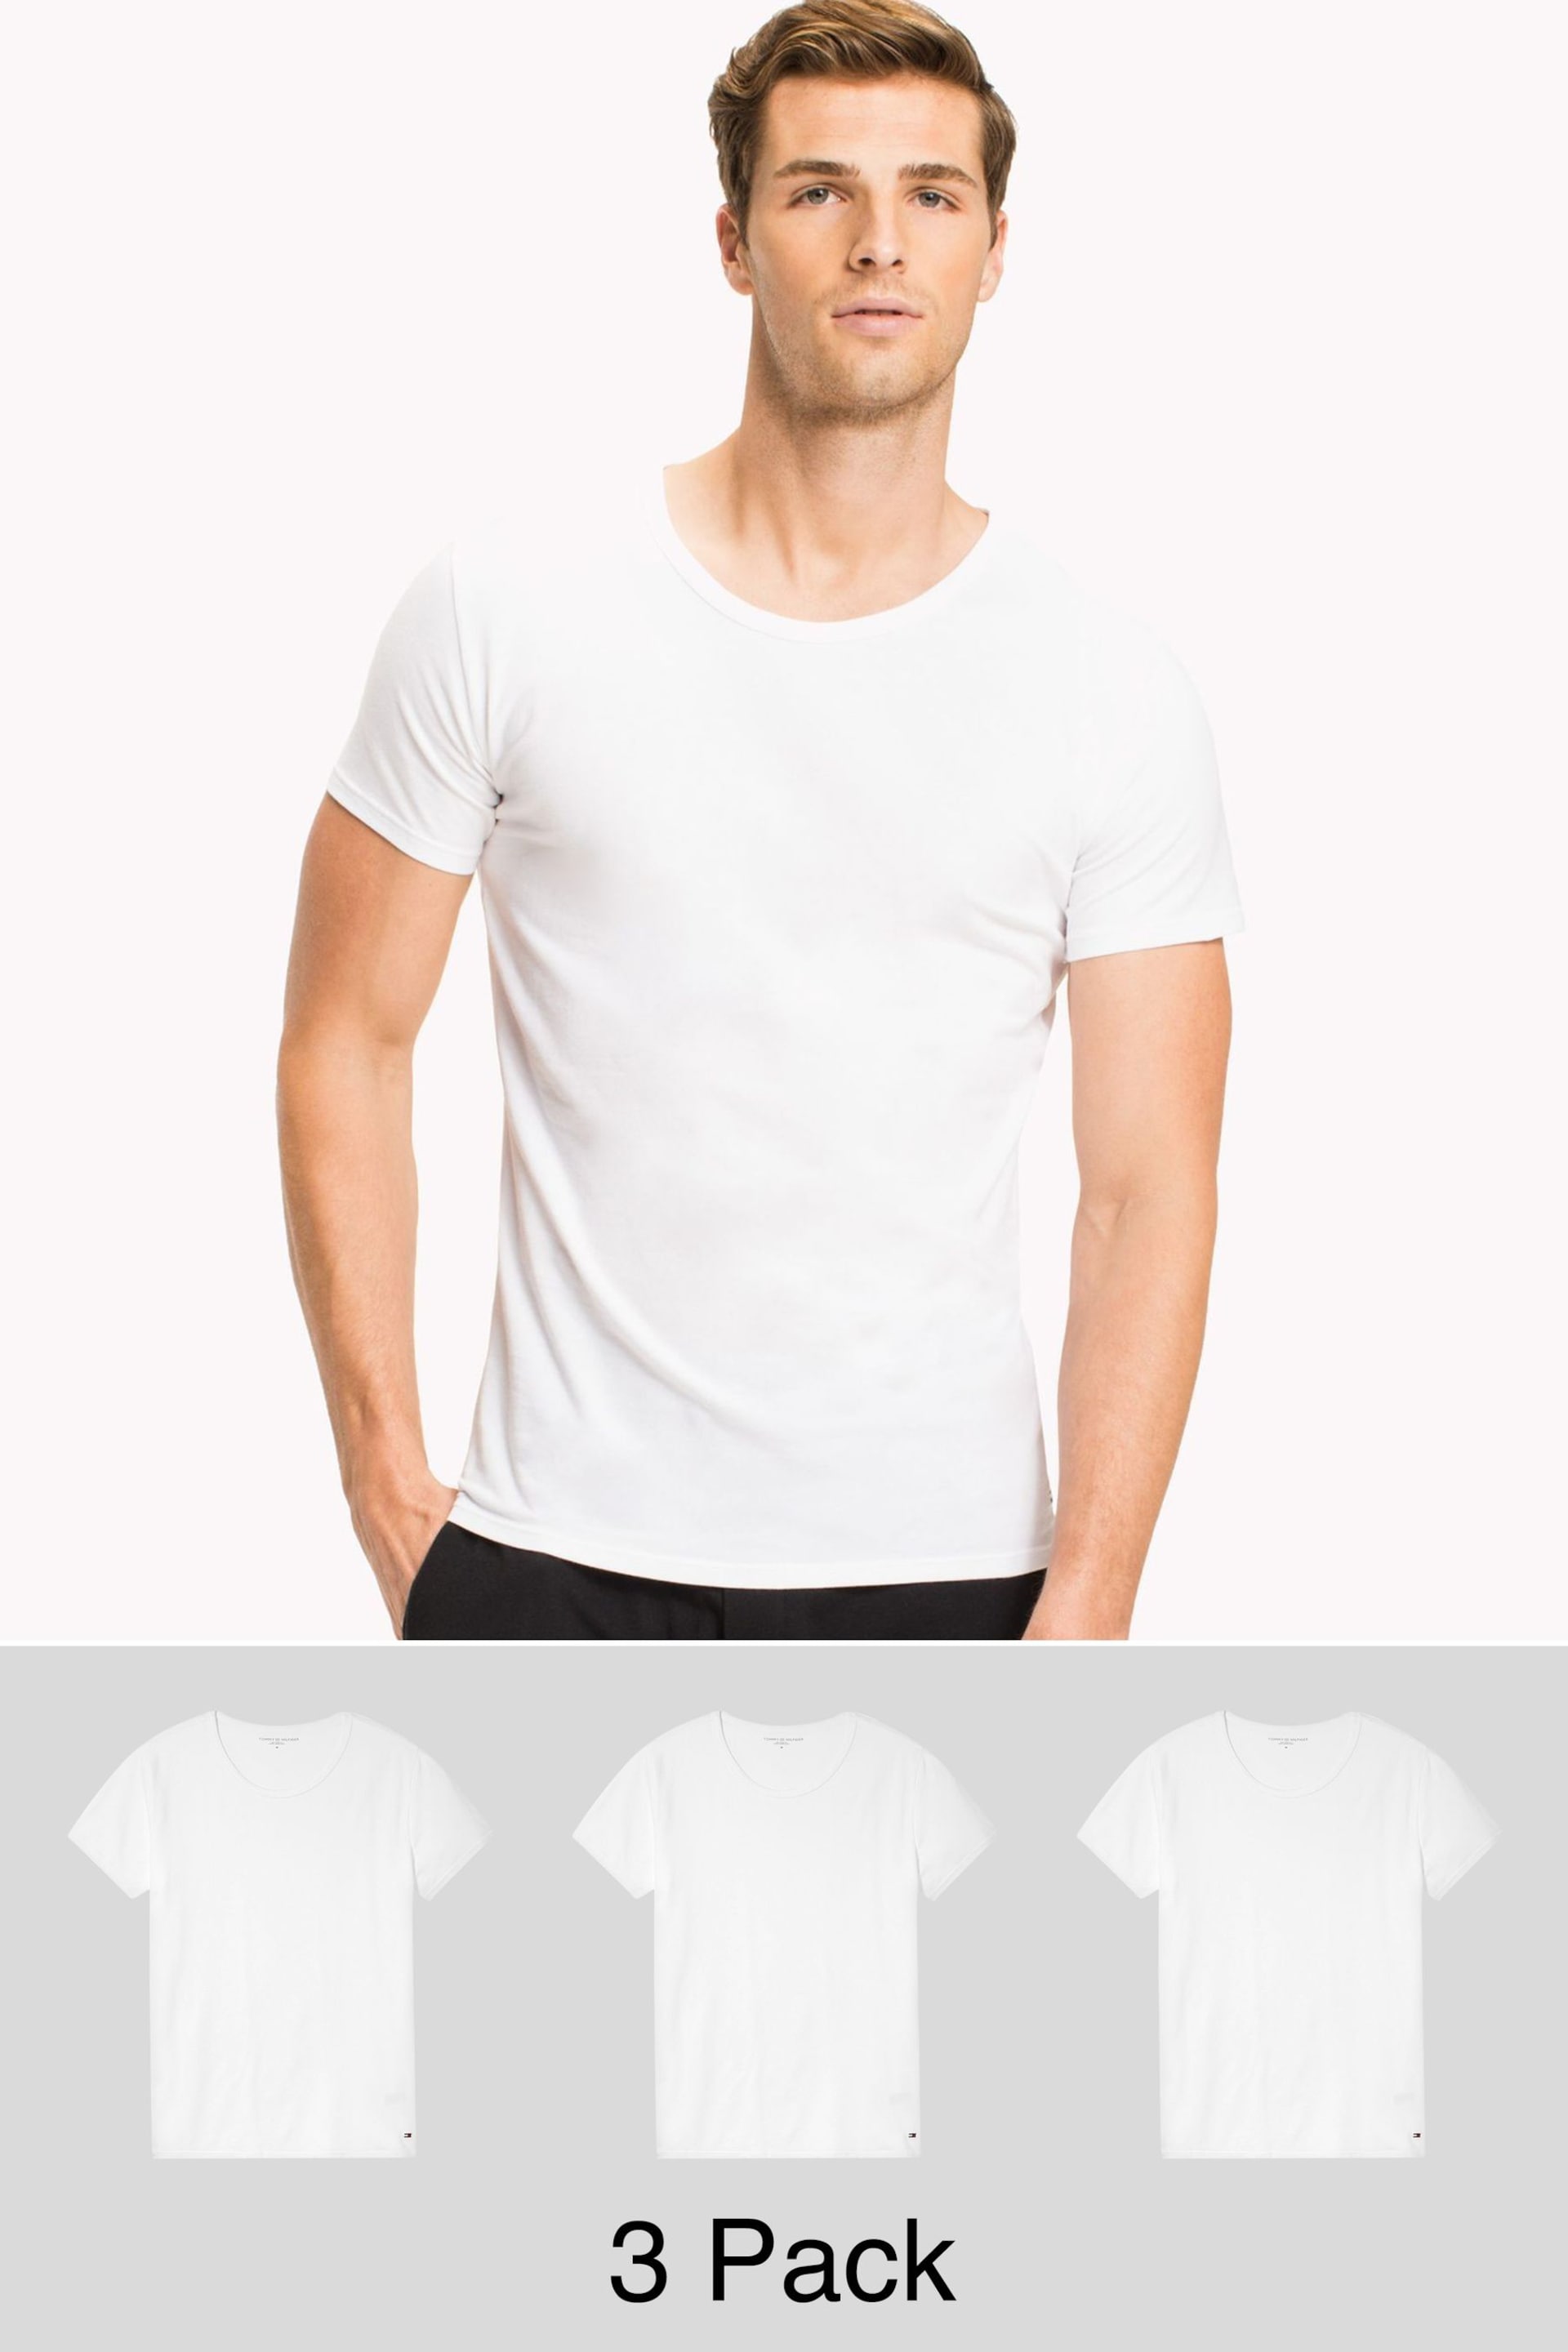 Tommy Hilfiger Premium Lounge T-Shirts 3 Pack - Image 2 of 2